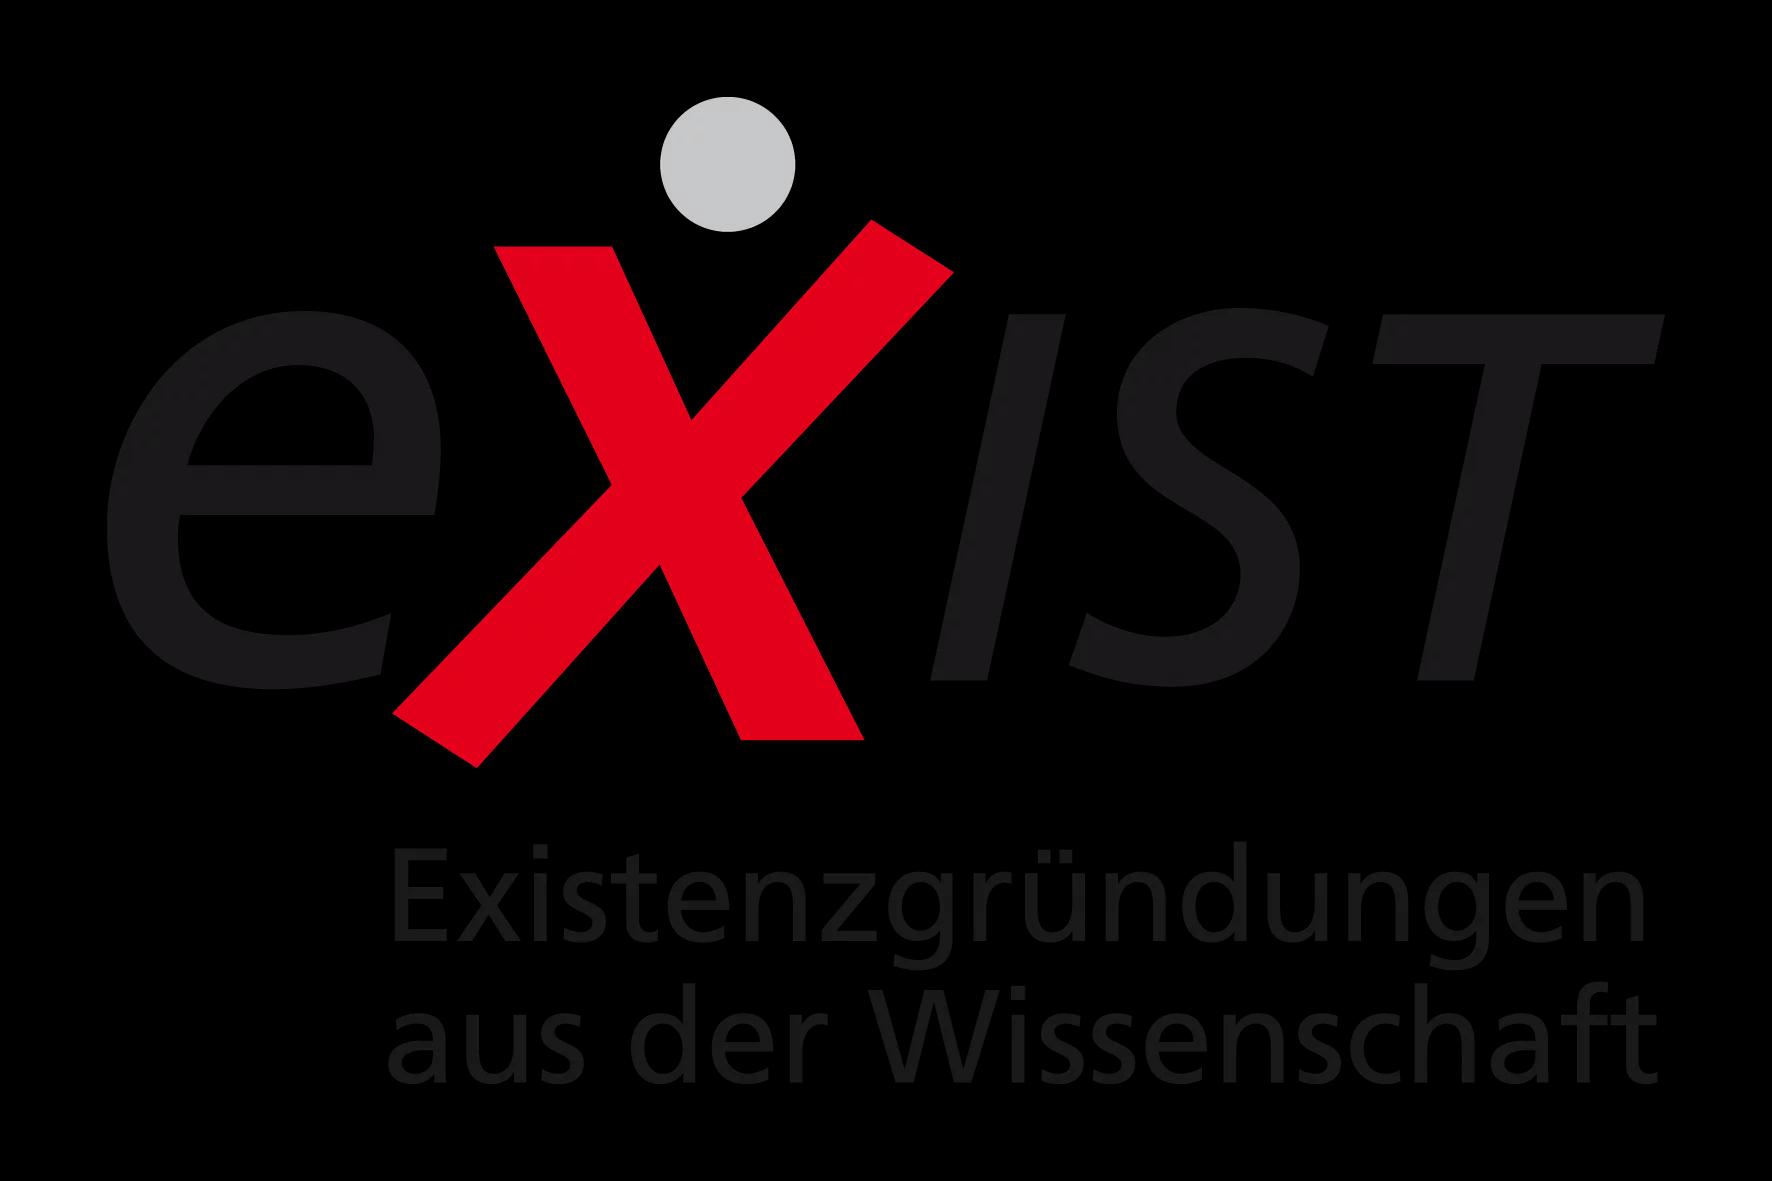 Logo of the EXIST business start-up grant of the Federal Ministry for Economic Affairs and Climate Action